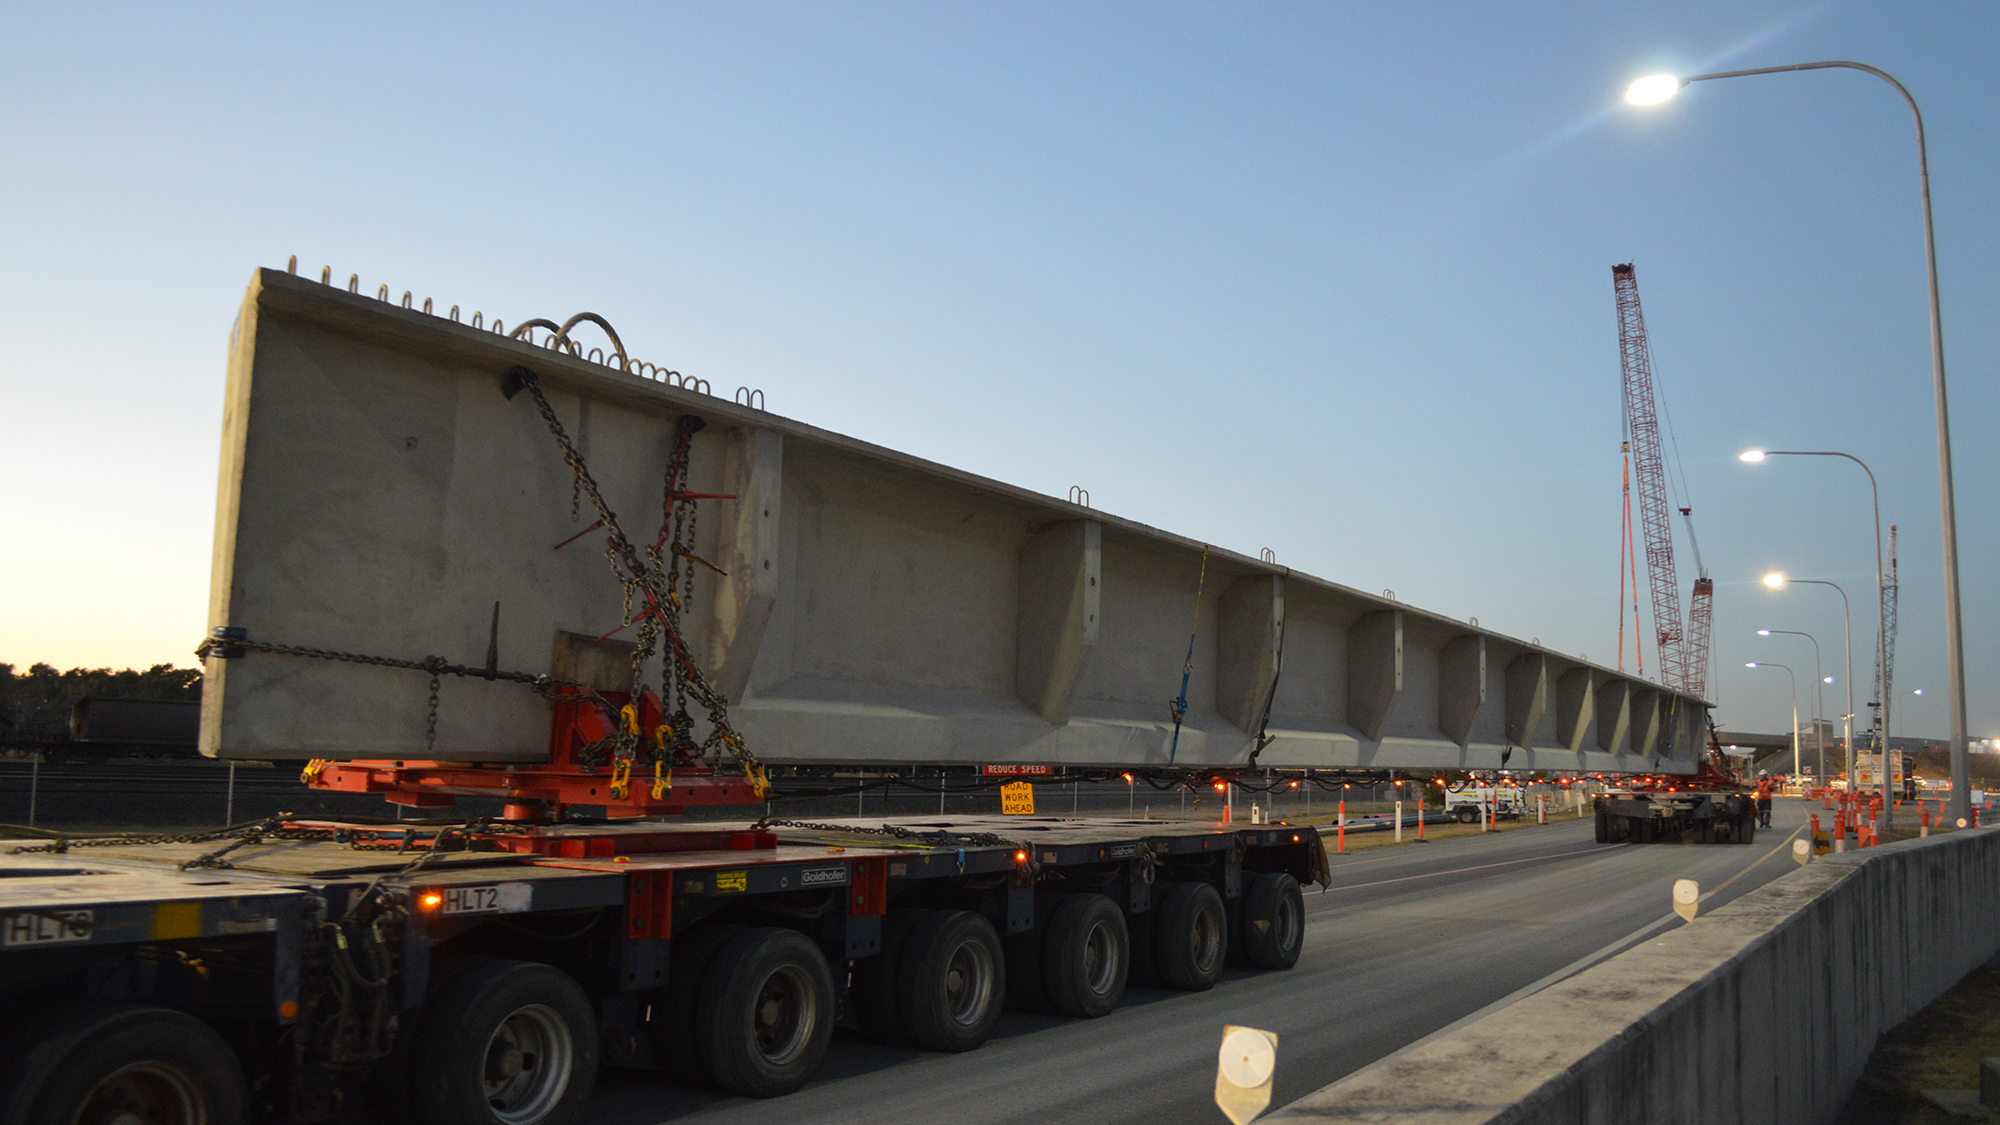 One of the super girders being transported to the Port of Brisbane